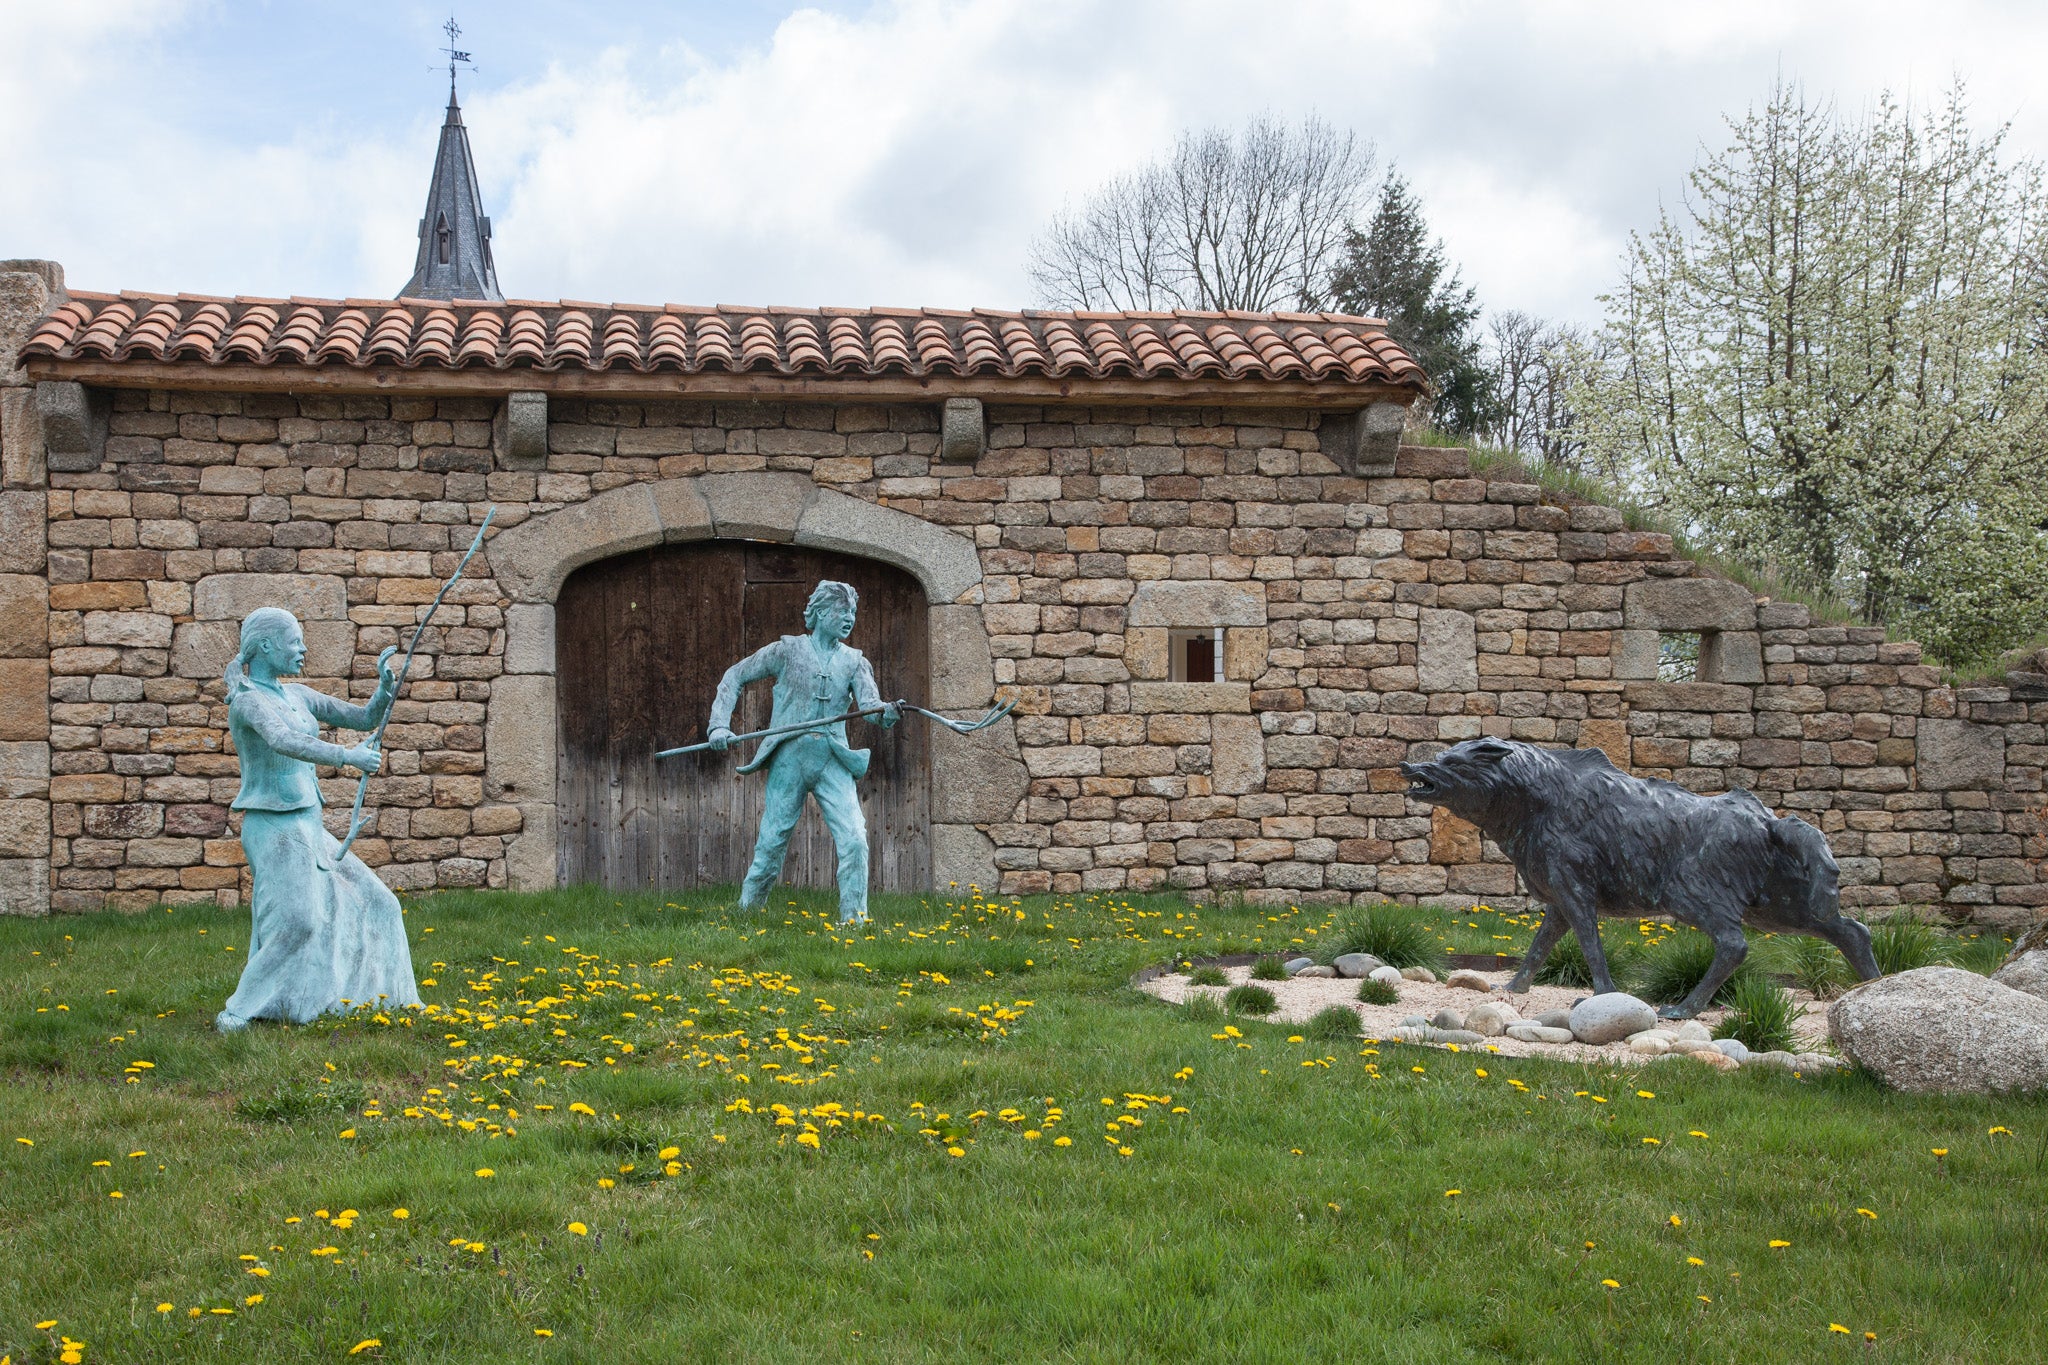 Two copper statues of peasants defend themselves from the Beast of GÃ©vaudan.